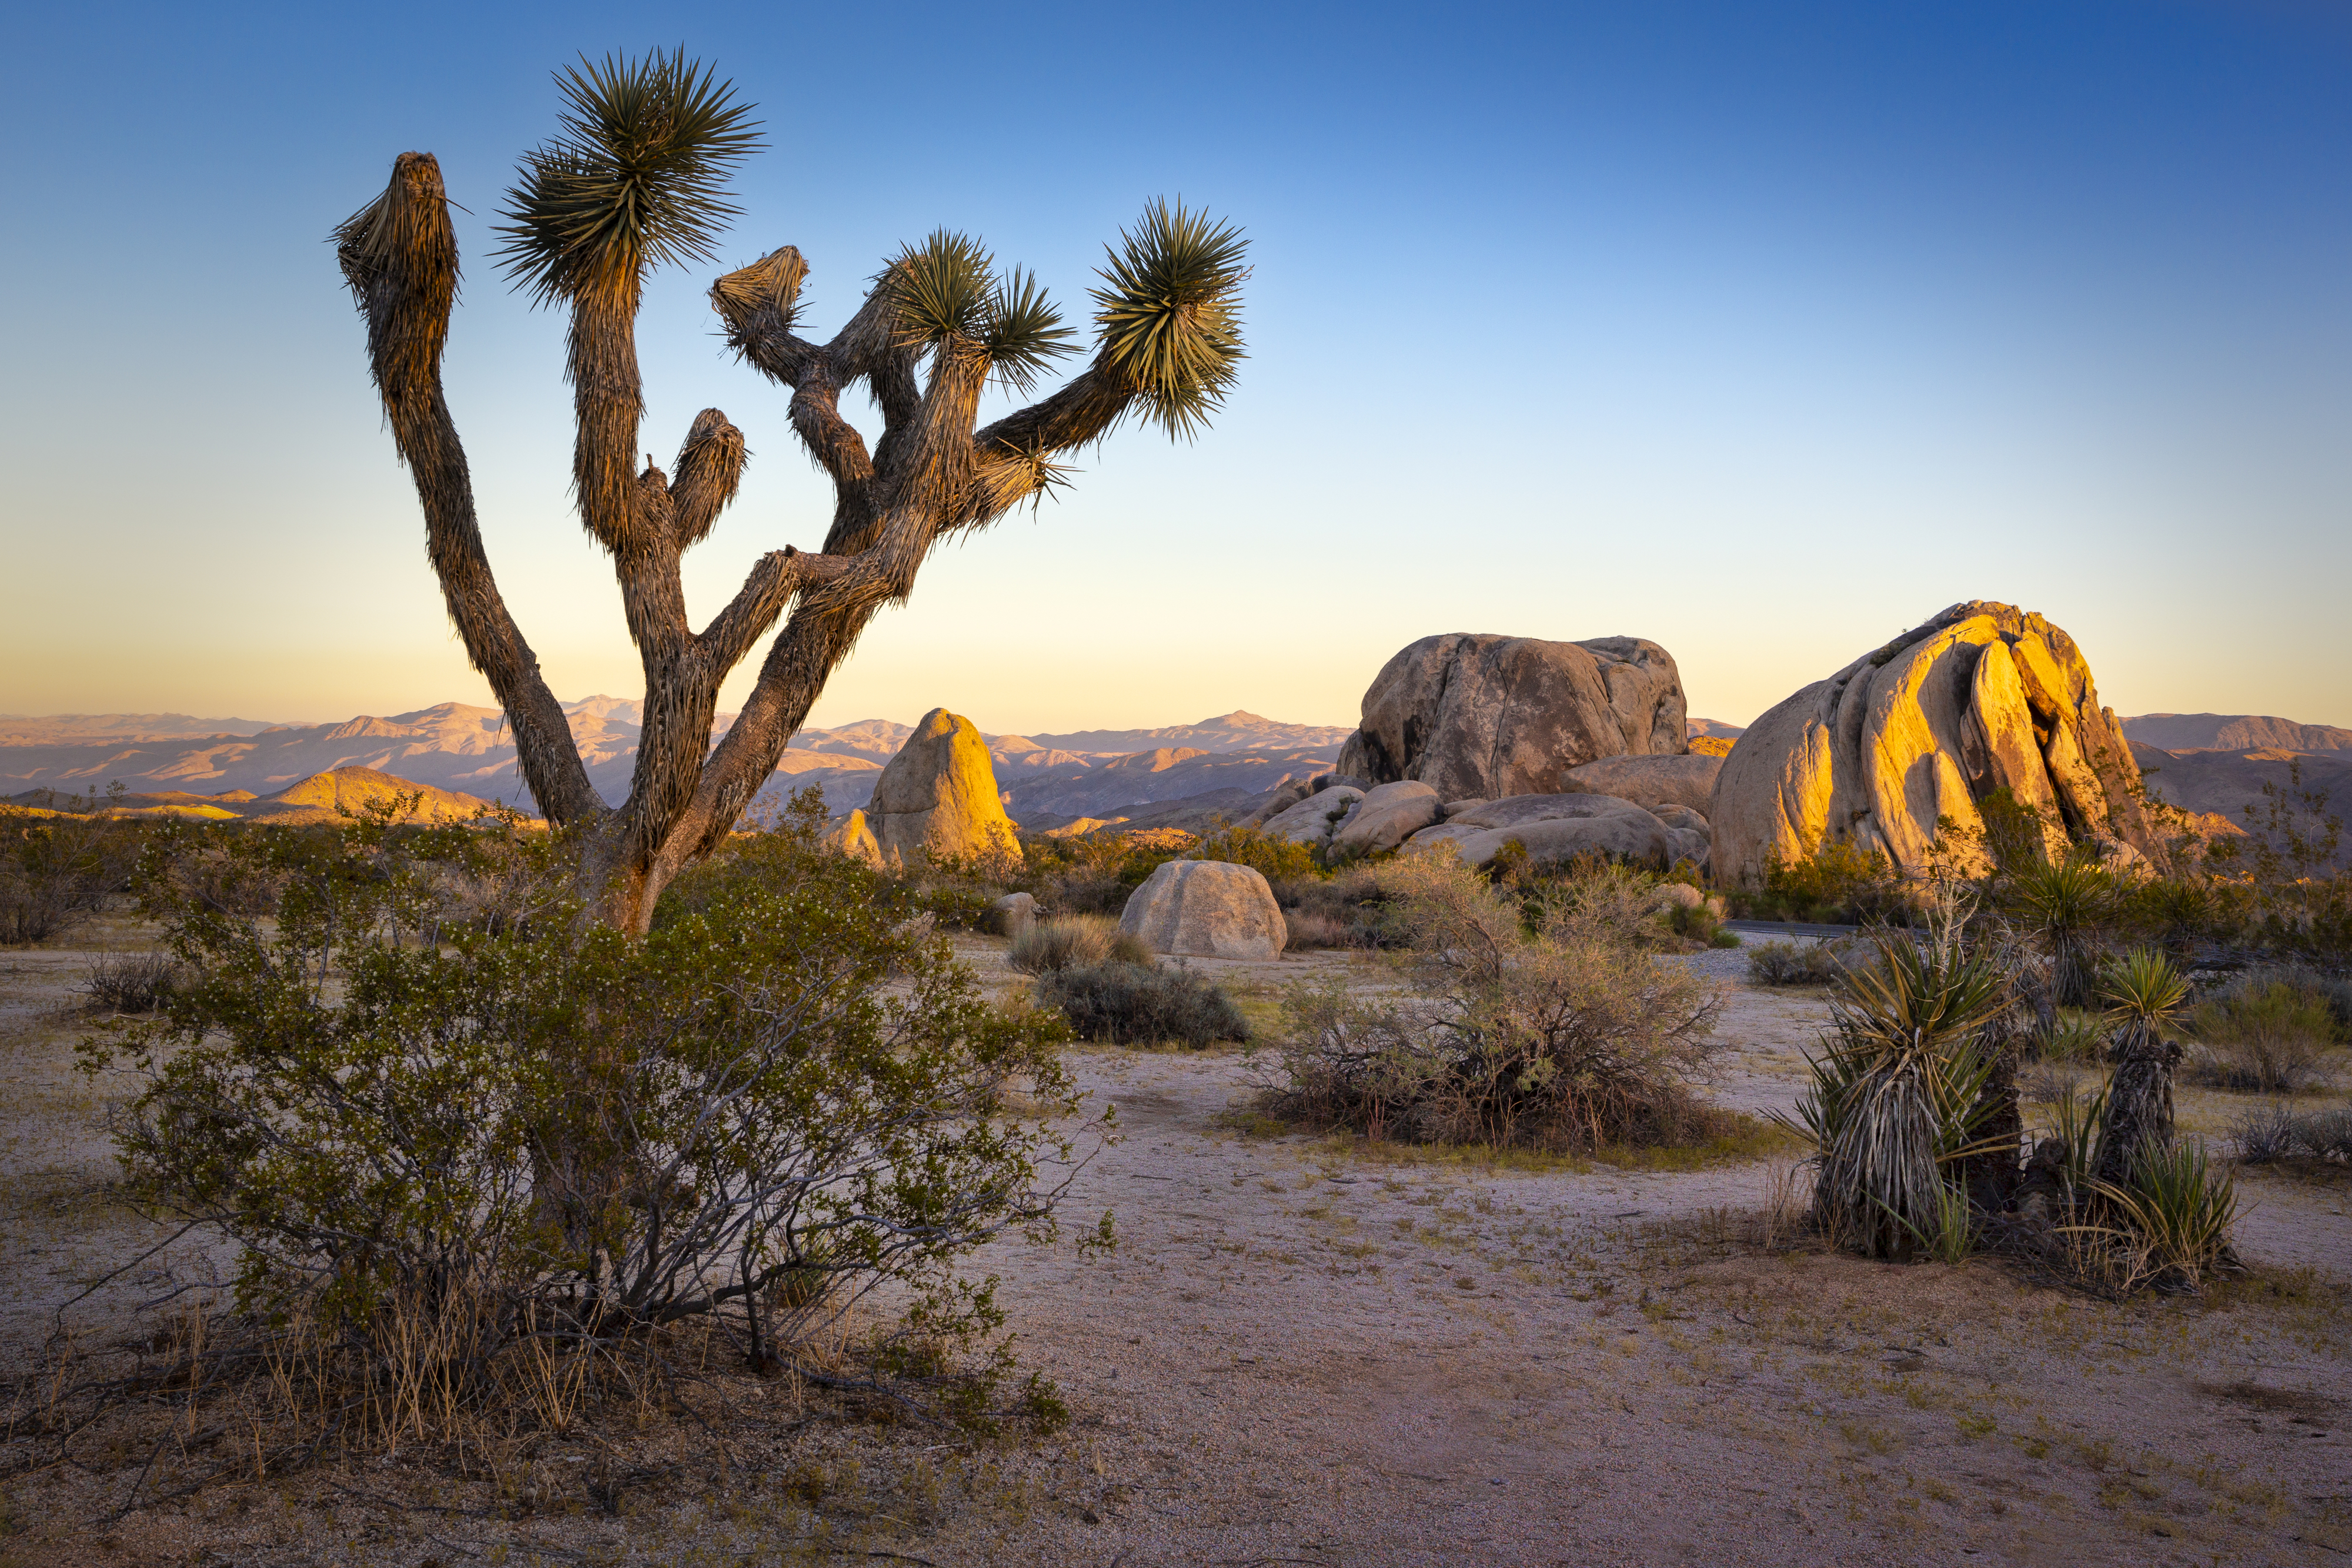 Desert landscape with Joshua trees and large rocks during sunset